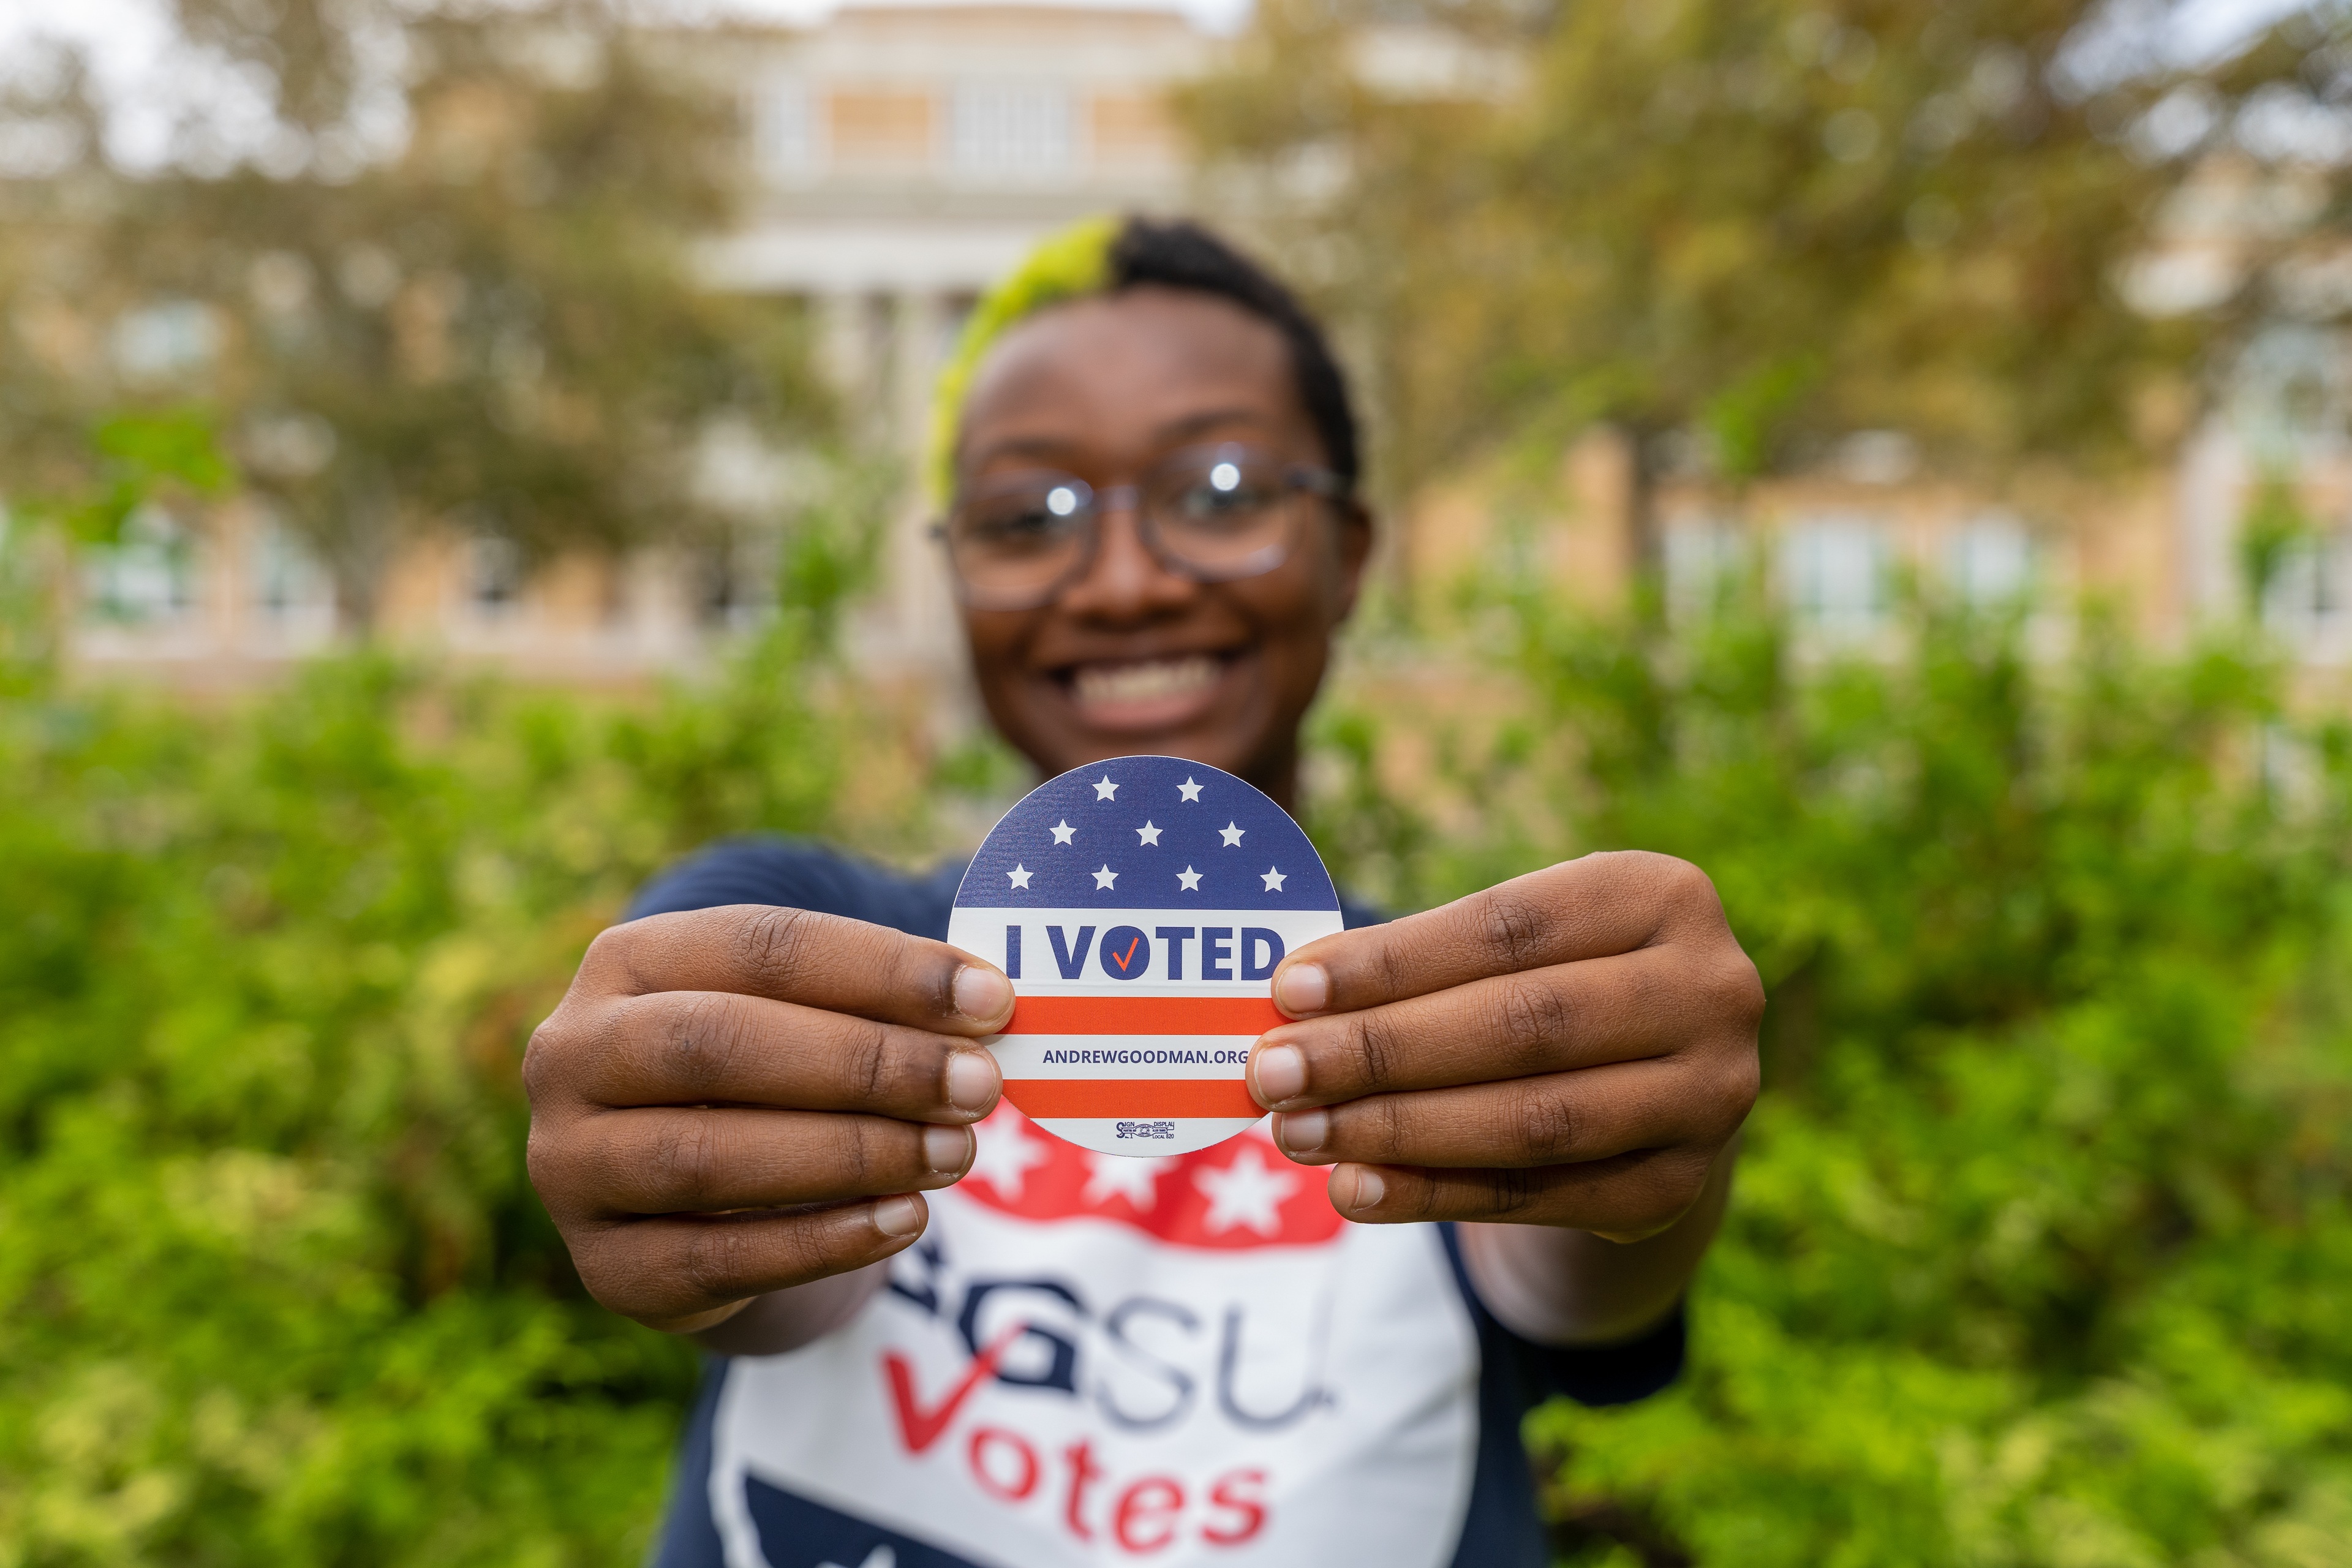 A person smiling while holding an "I Voted" sticker.